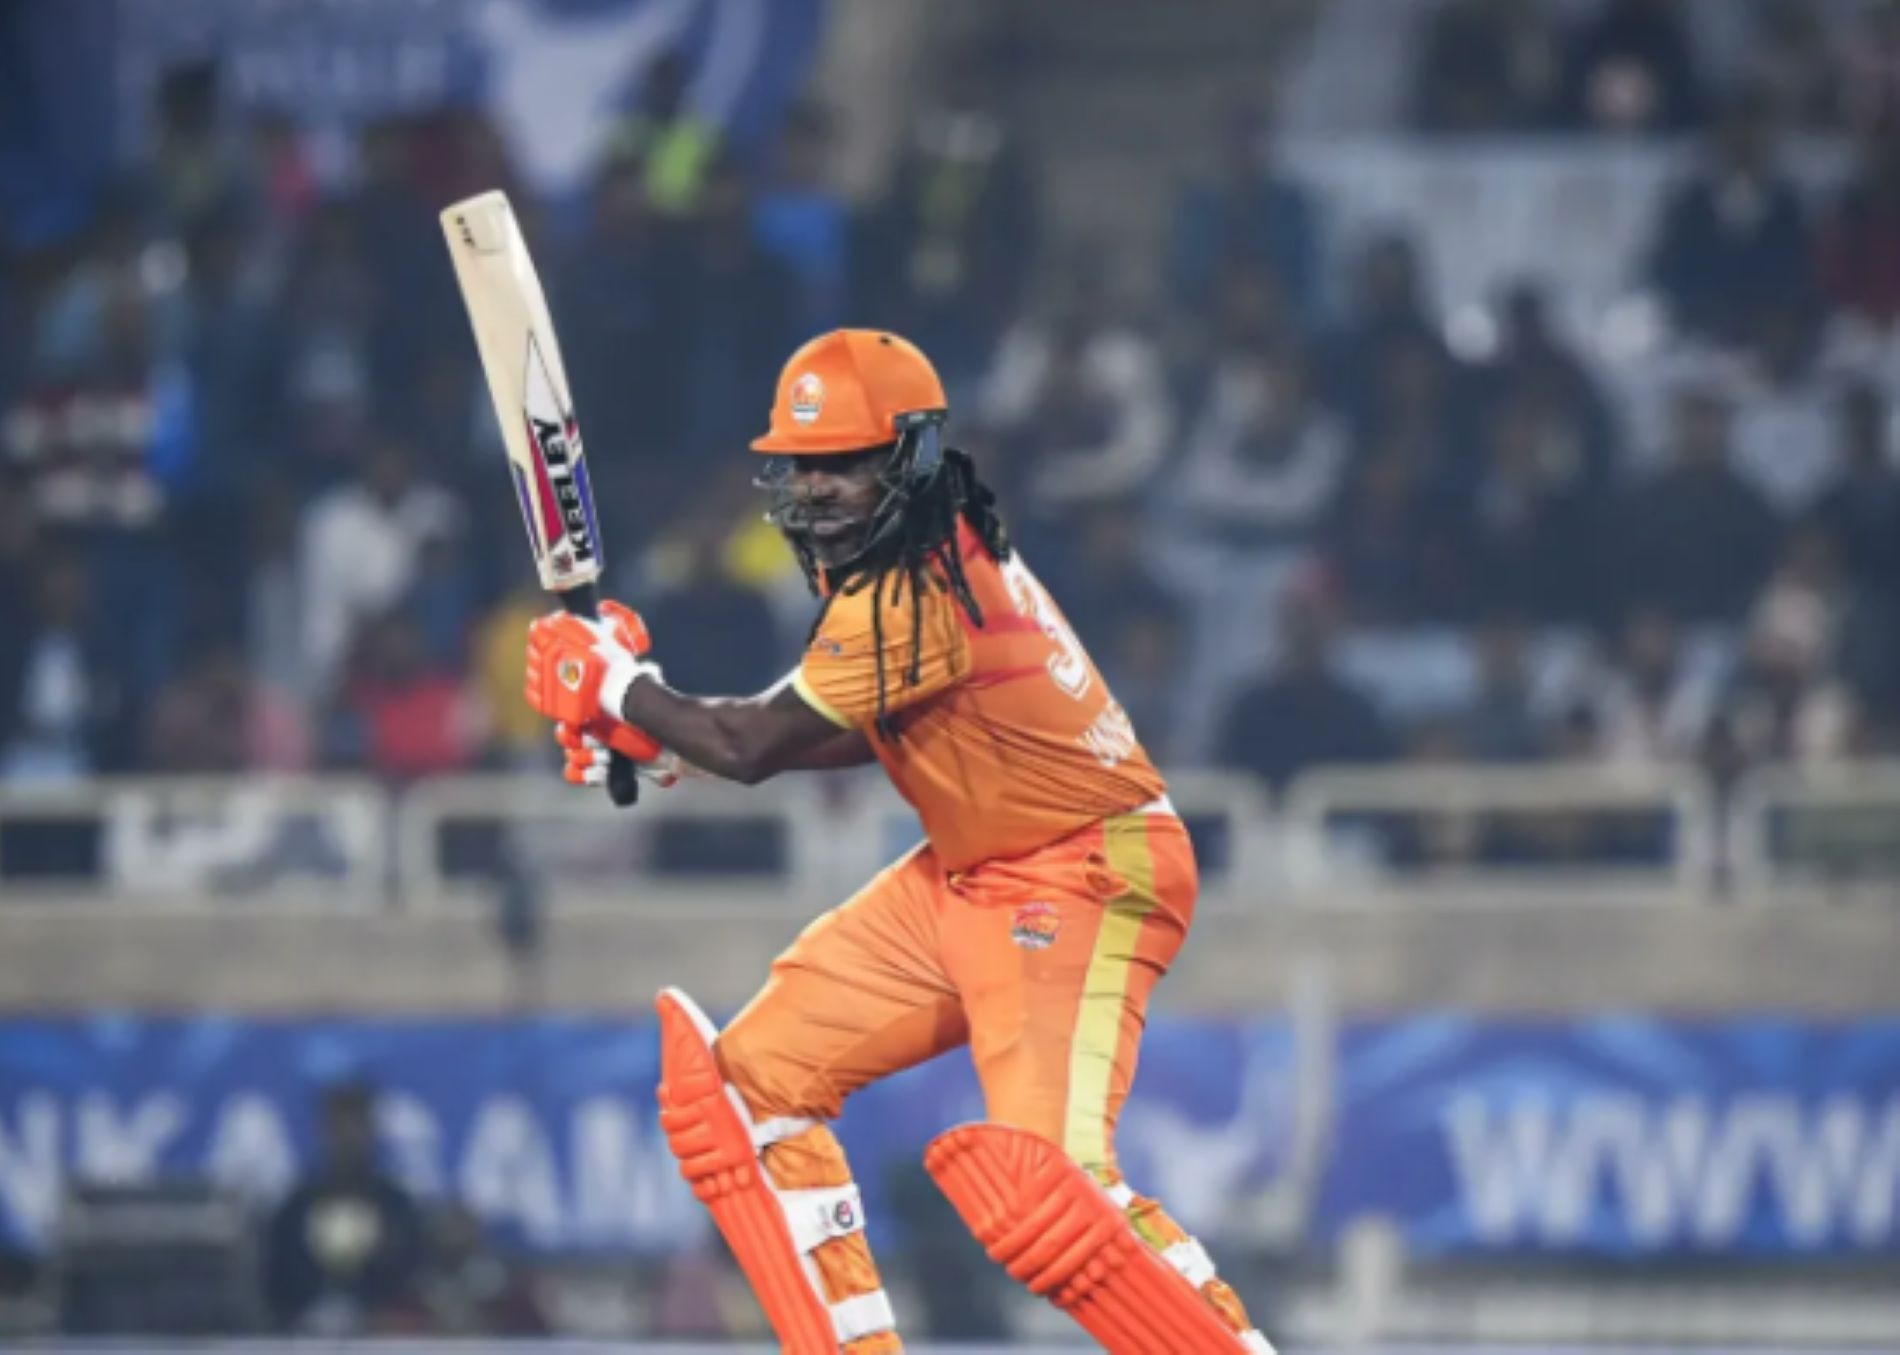 Gayle plays for the Gujarat Giants in the Legends League Cricket.